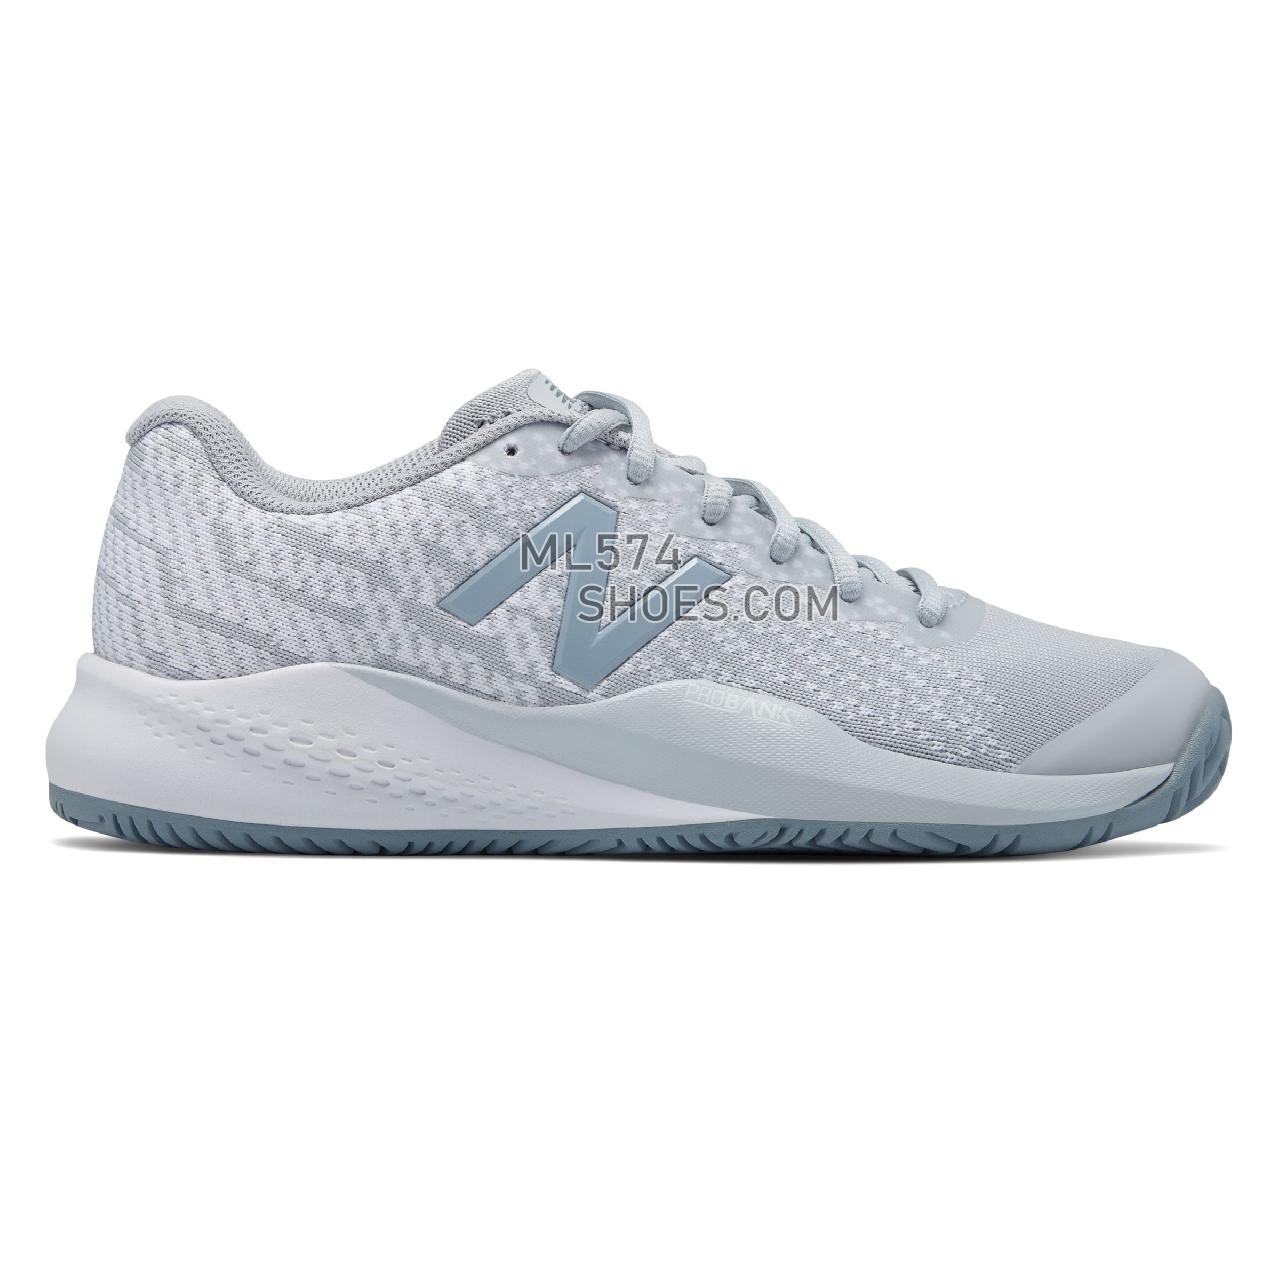 New Balance 996v3 - Women's 996 - Tennis / Court Light Cyclone with White - WCH996L3